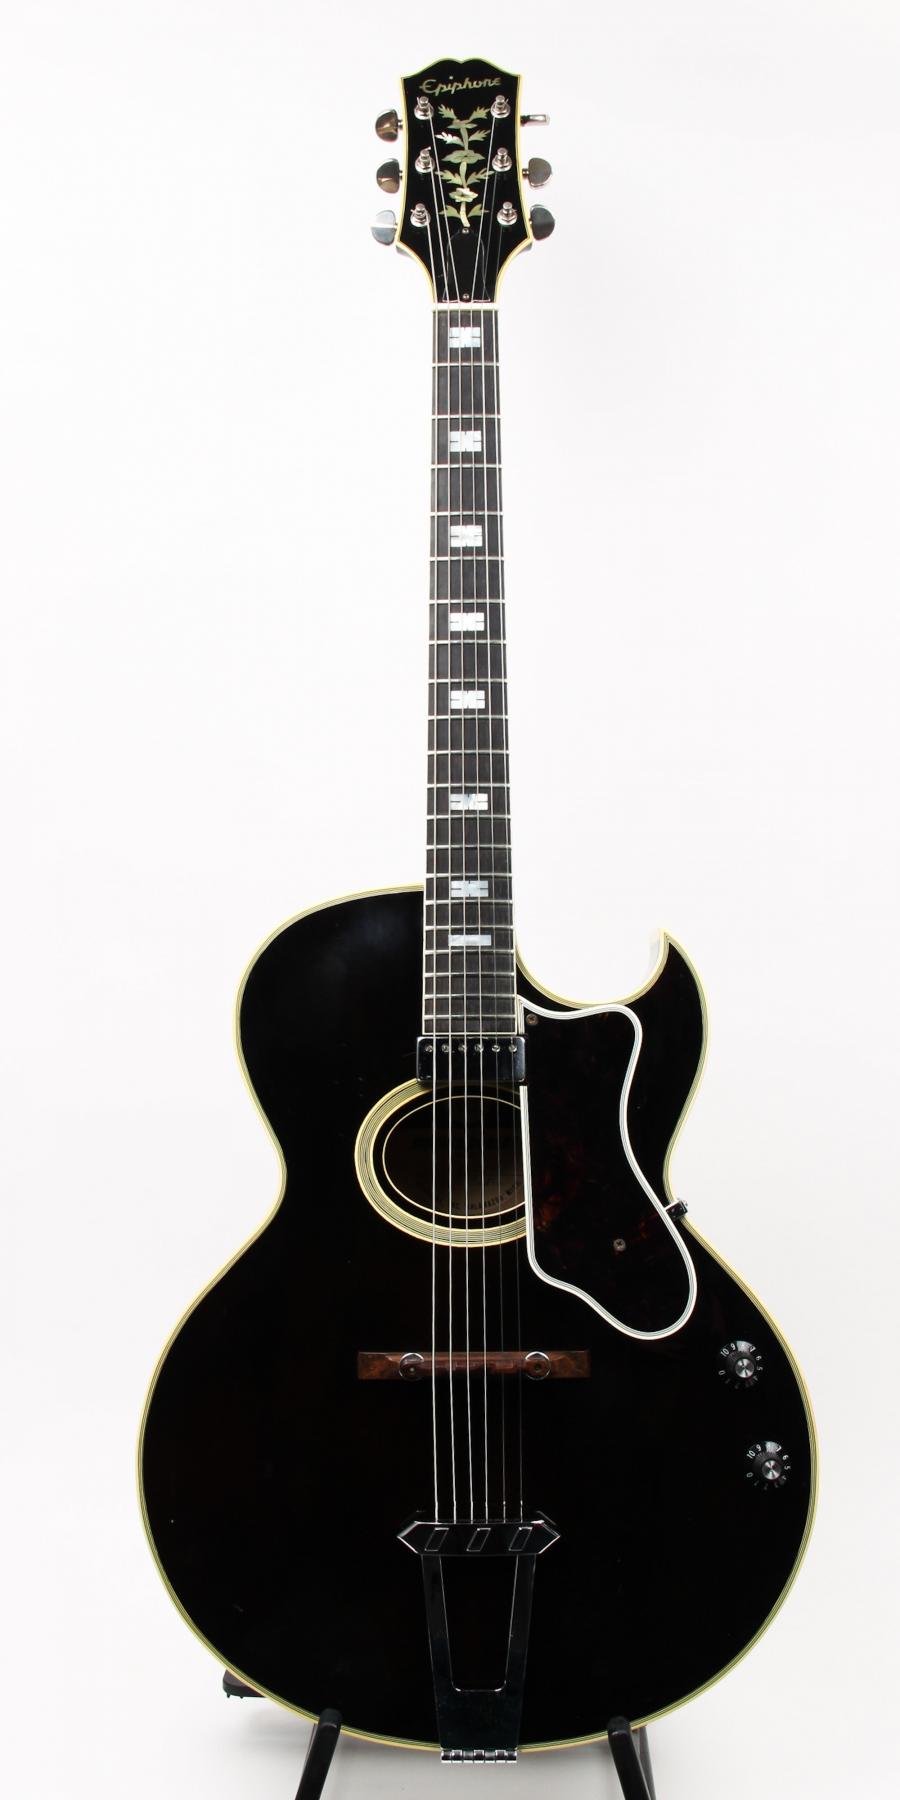 Is an Epiphone Howard Roberts worth $550?